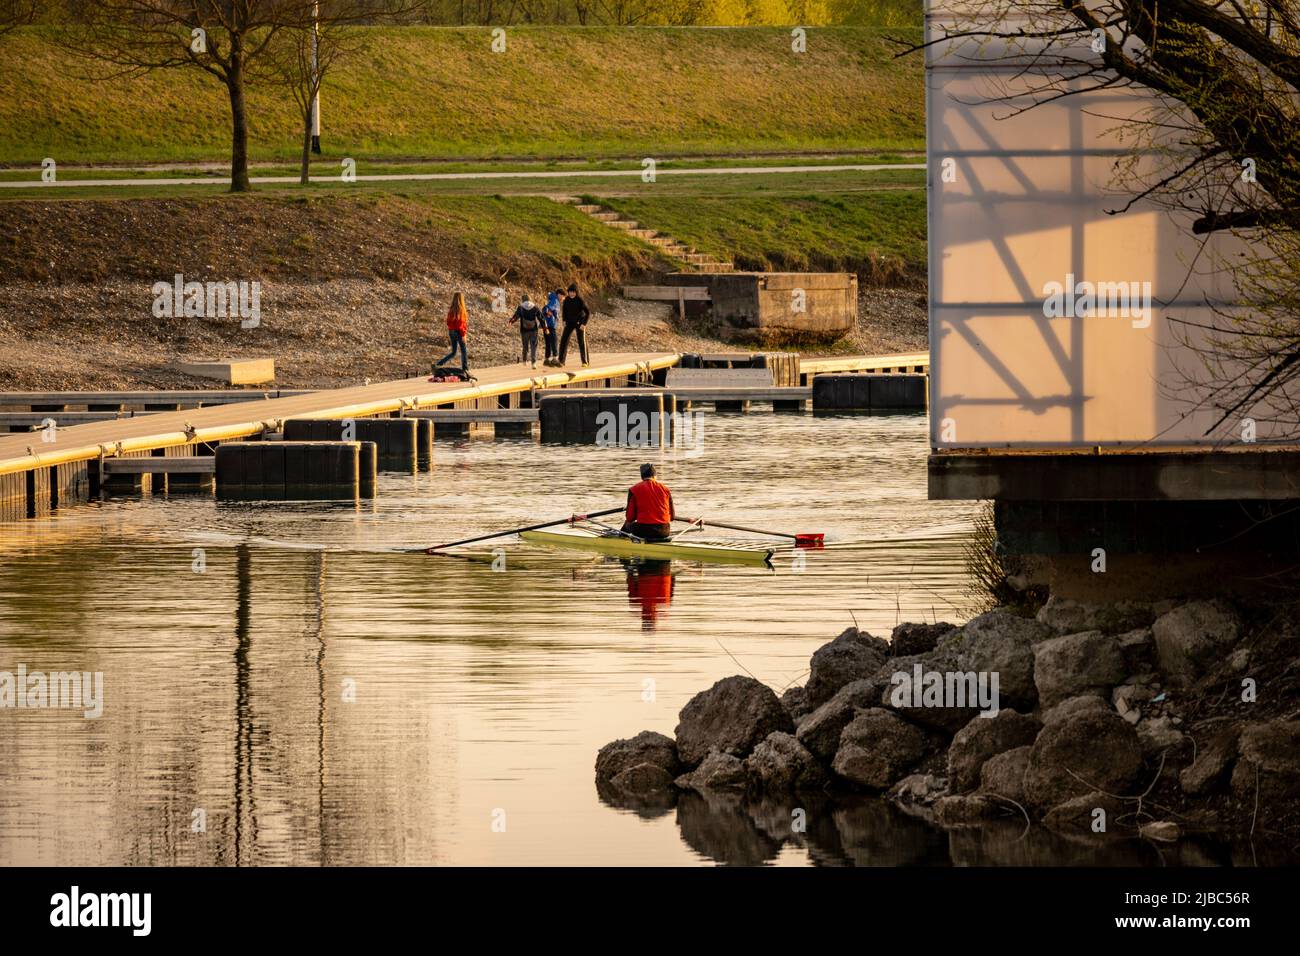 Zagreb, Croatia-April 1st, 2022: Man in the kayak rowing at the jarun lake, Croatia with new docks being recently built by the shore Stock Photo